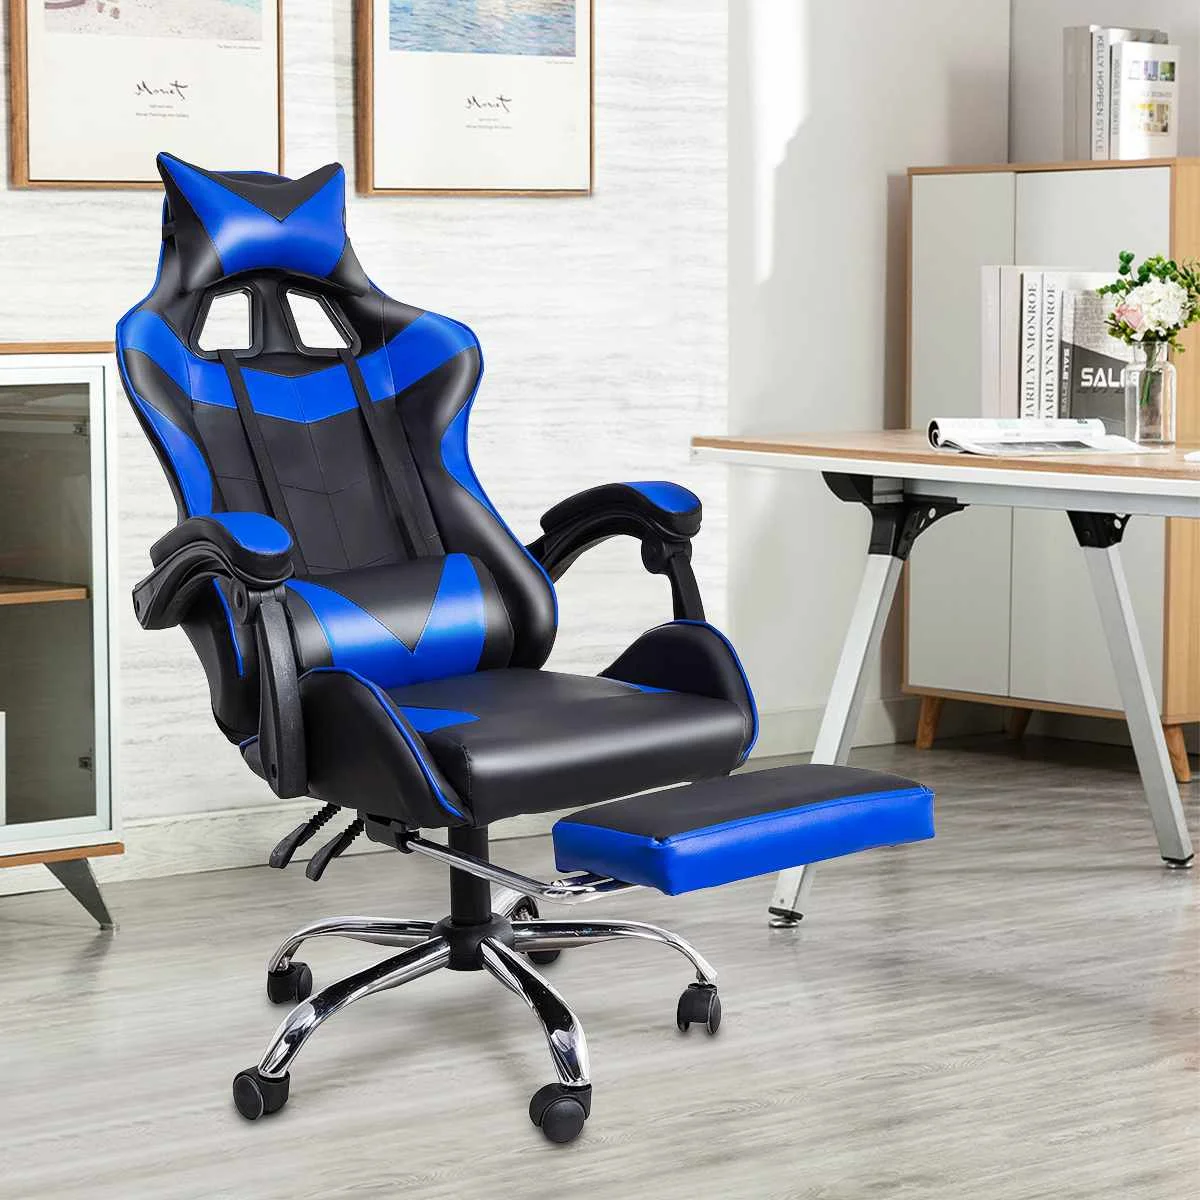 Reclining Office Chair Adjustable Height Rotating Lift Chair